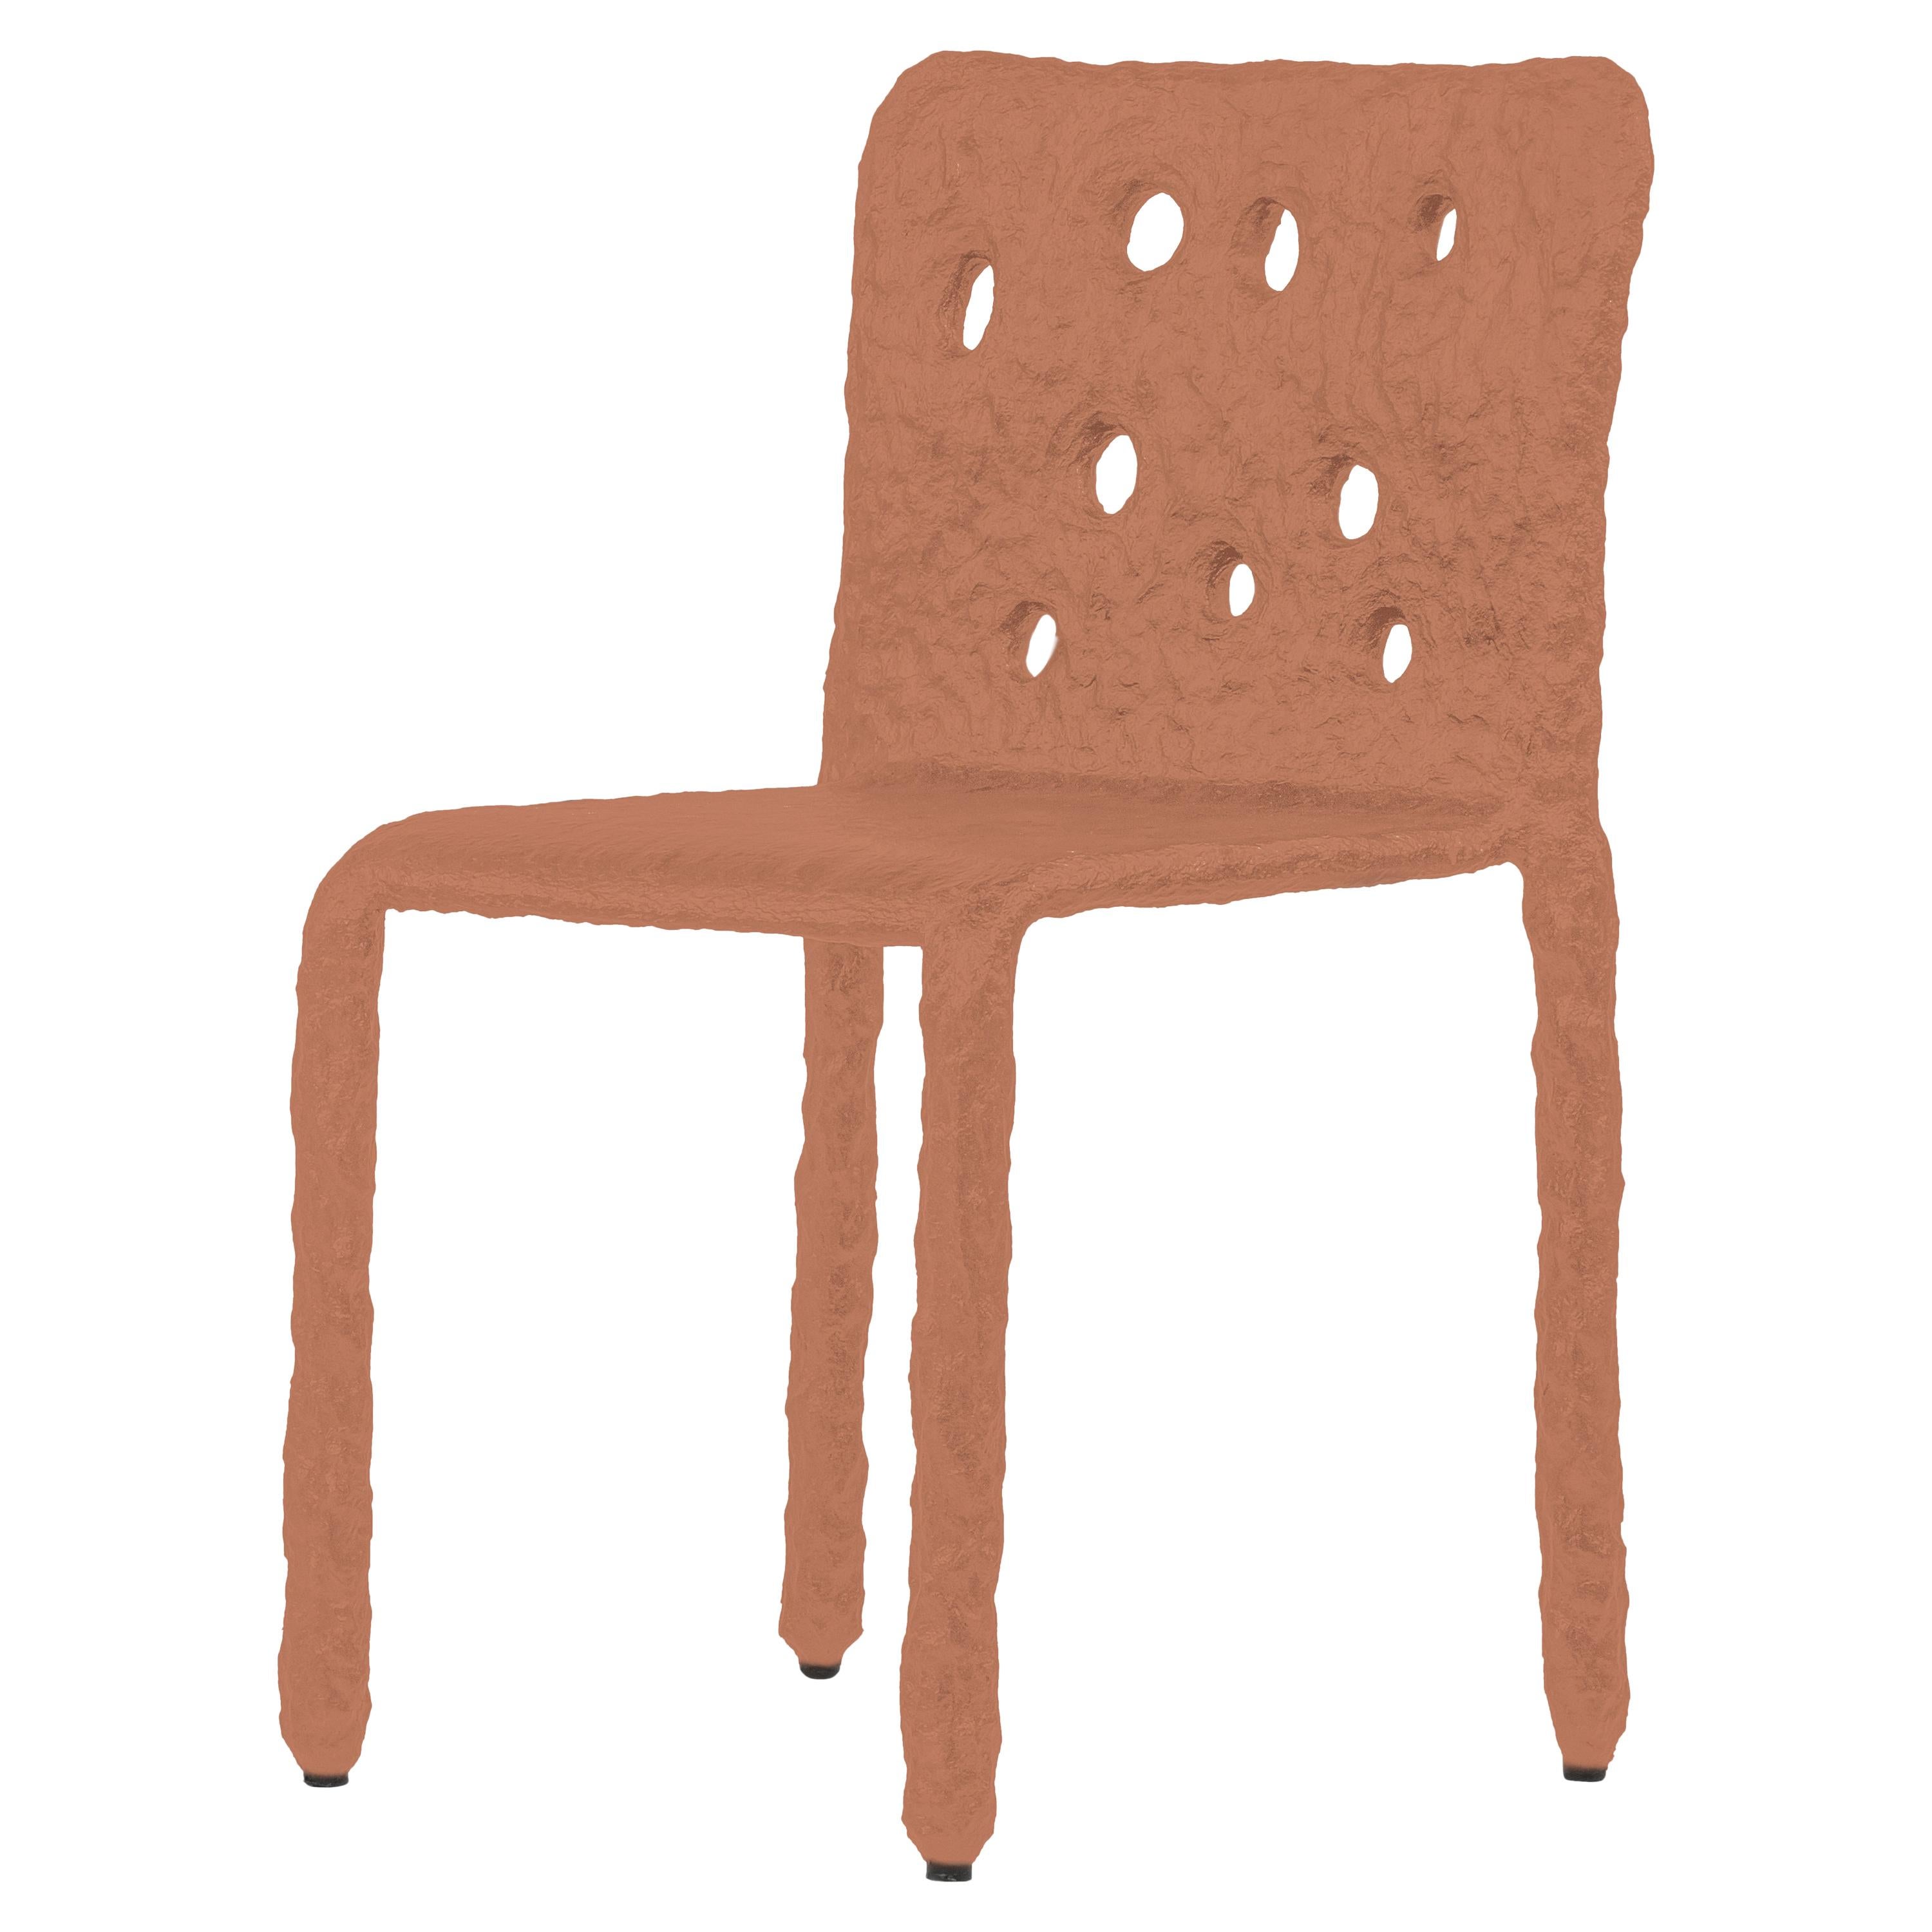 Orange Sculpted Contemporary Chair by Faina For Sale